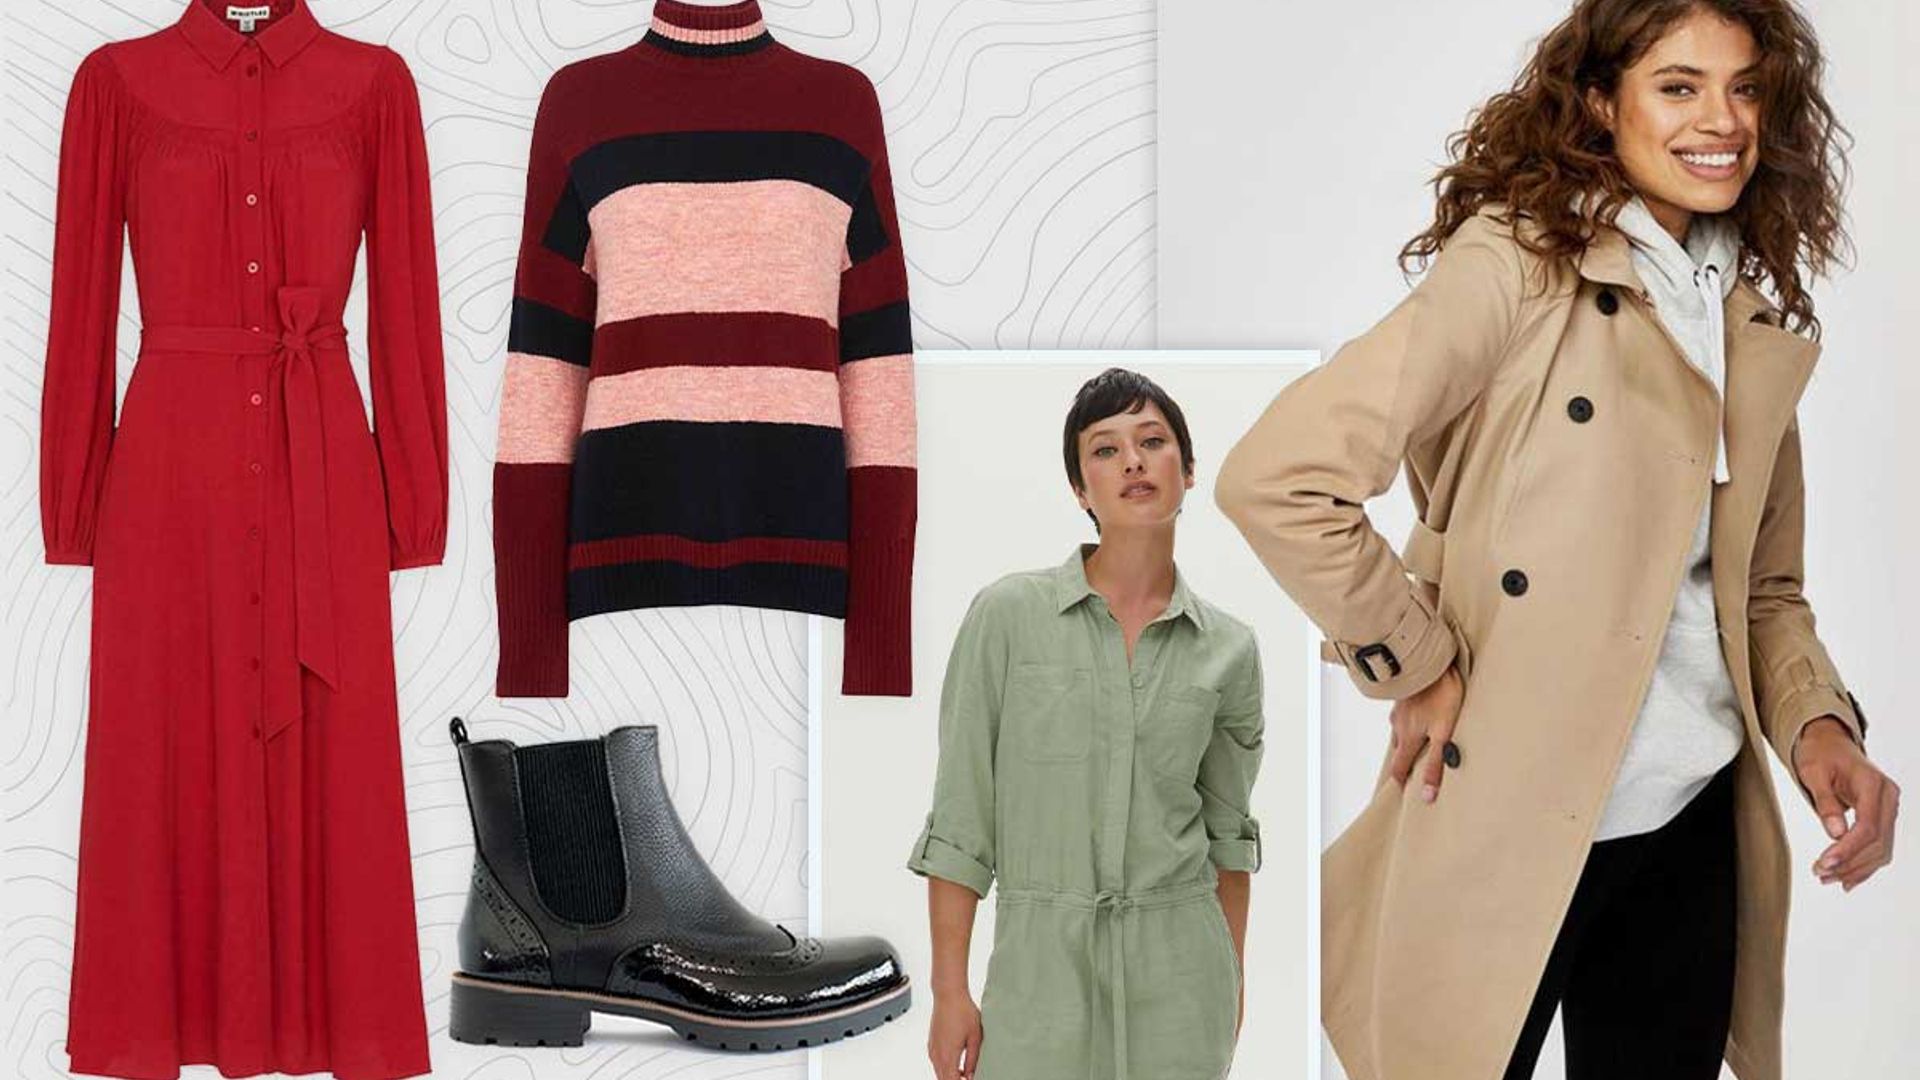 10 trending fashion items we’re loving on eBay right now